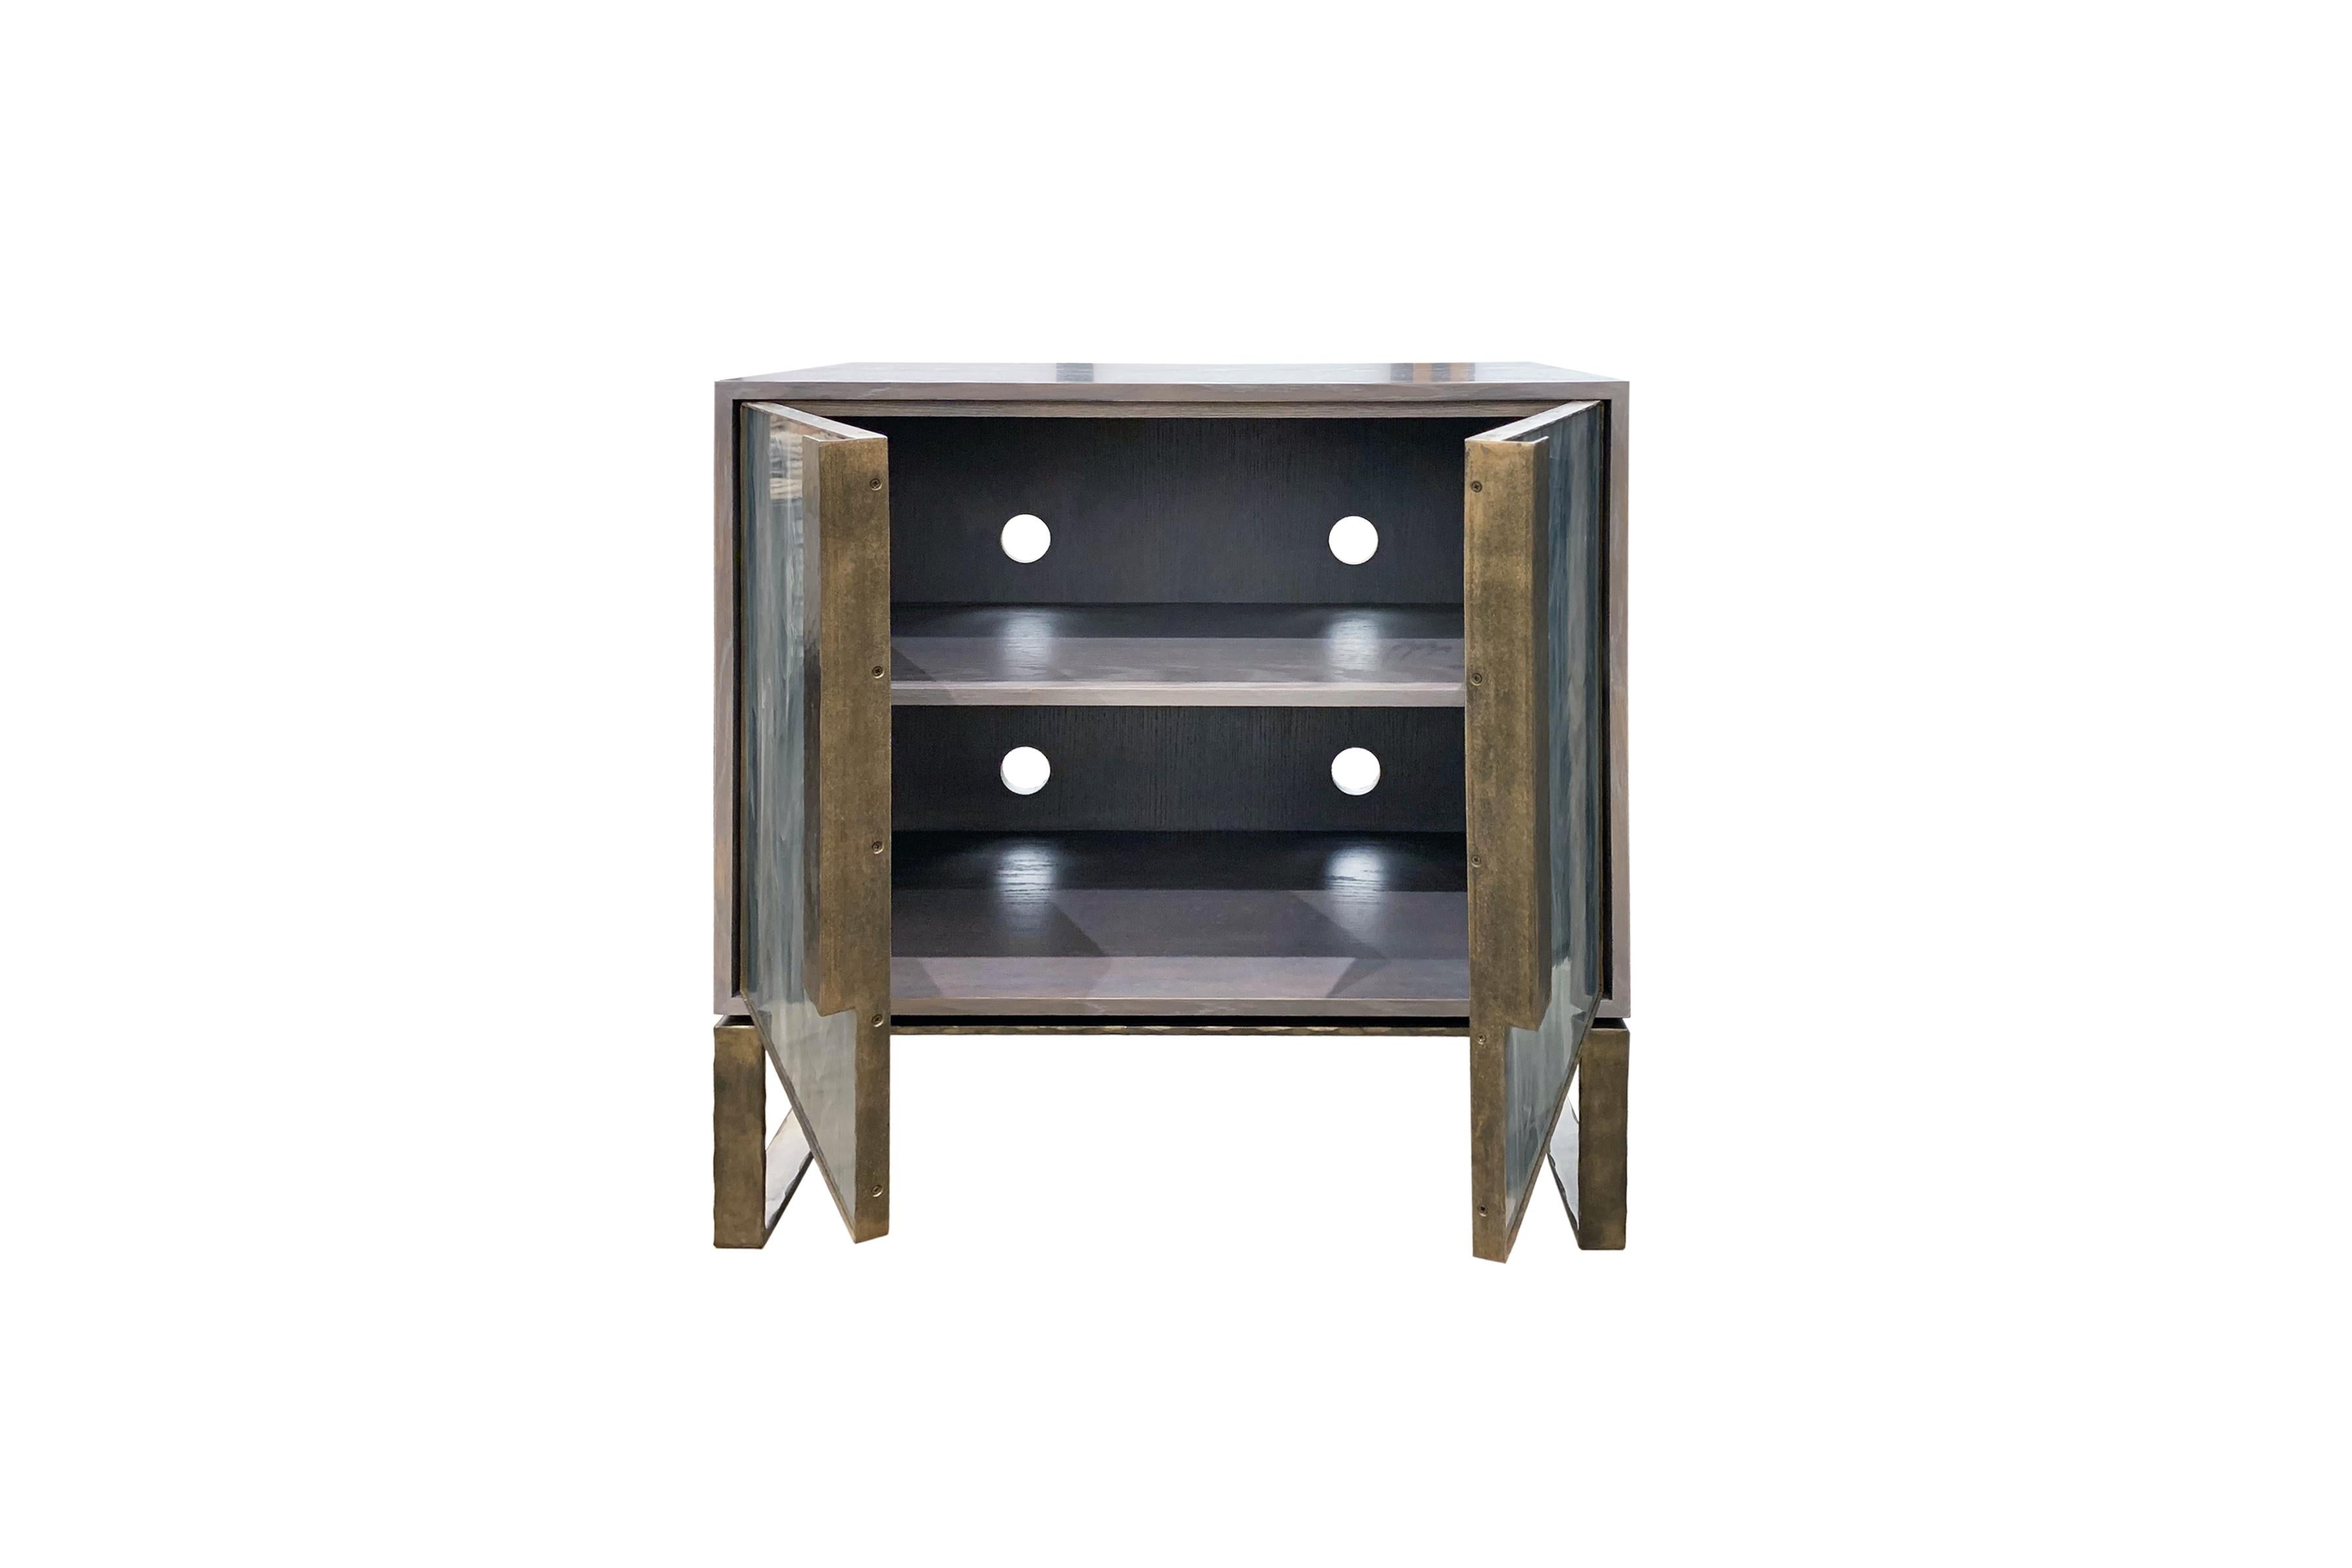 This chelsea buffet or sideboard by Ercole home has a 2-door front, with Earl Gray Ceruse wood finish on oak.
Handcut glass panels in Wispy Gray Silver are on the door surface.
Hand-hammered metal framed doors, handles, and base in dark bronze metal